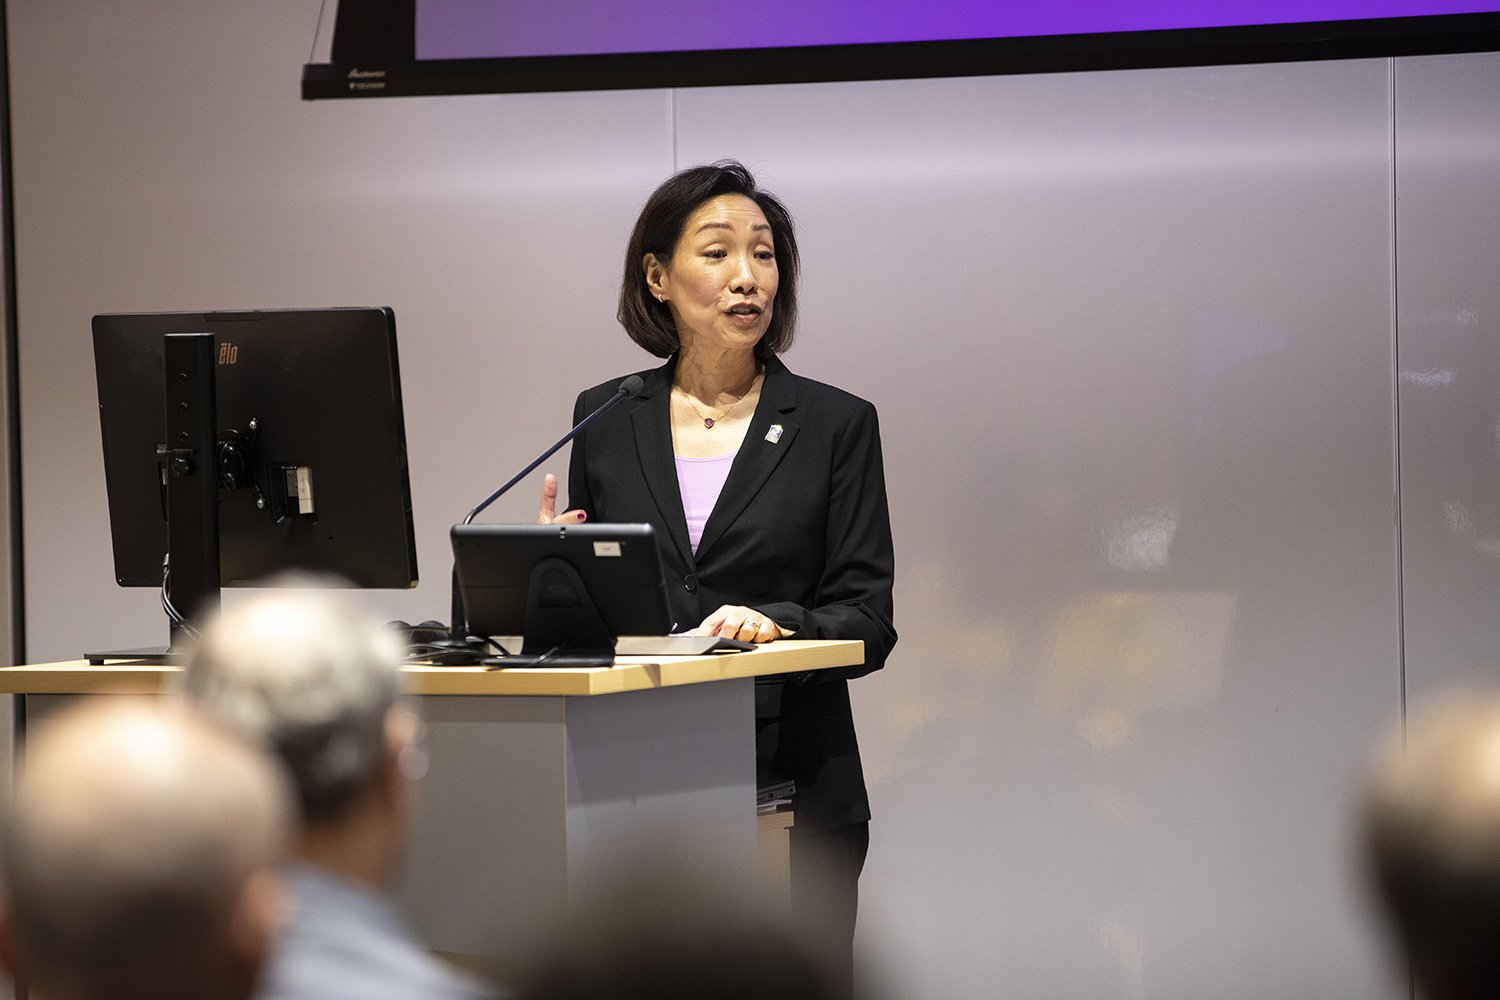 UAlbany Provost Carol Kim welcomes guests to the Inventor Recognition Ceremony, part of Research and Entrepreneurship Week at UAlbany (Photo by Patrick Dodson).